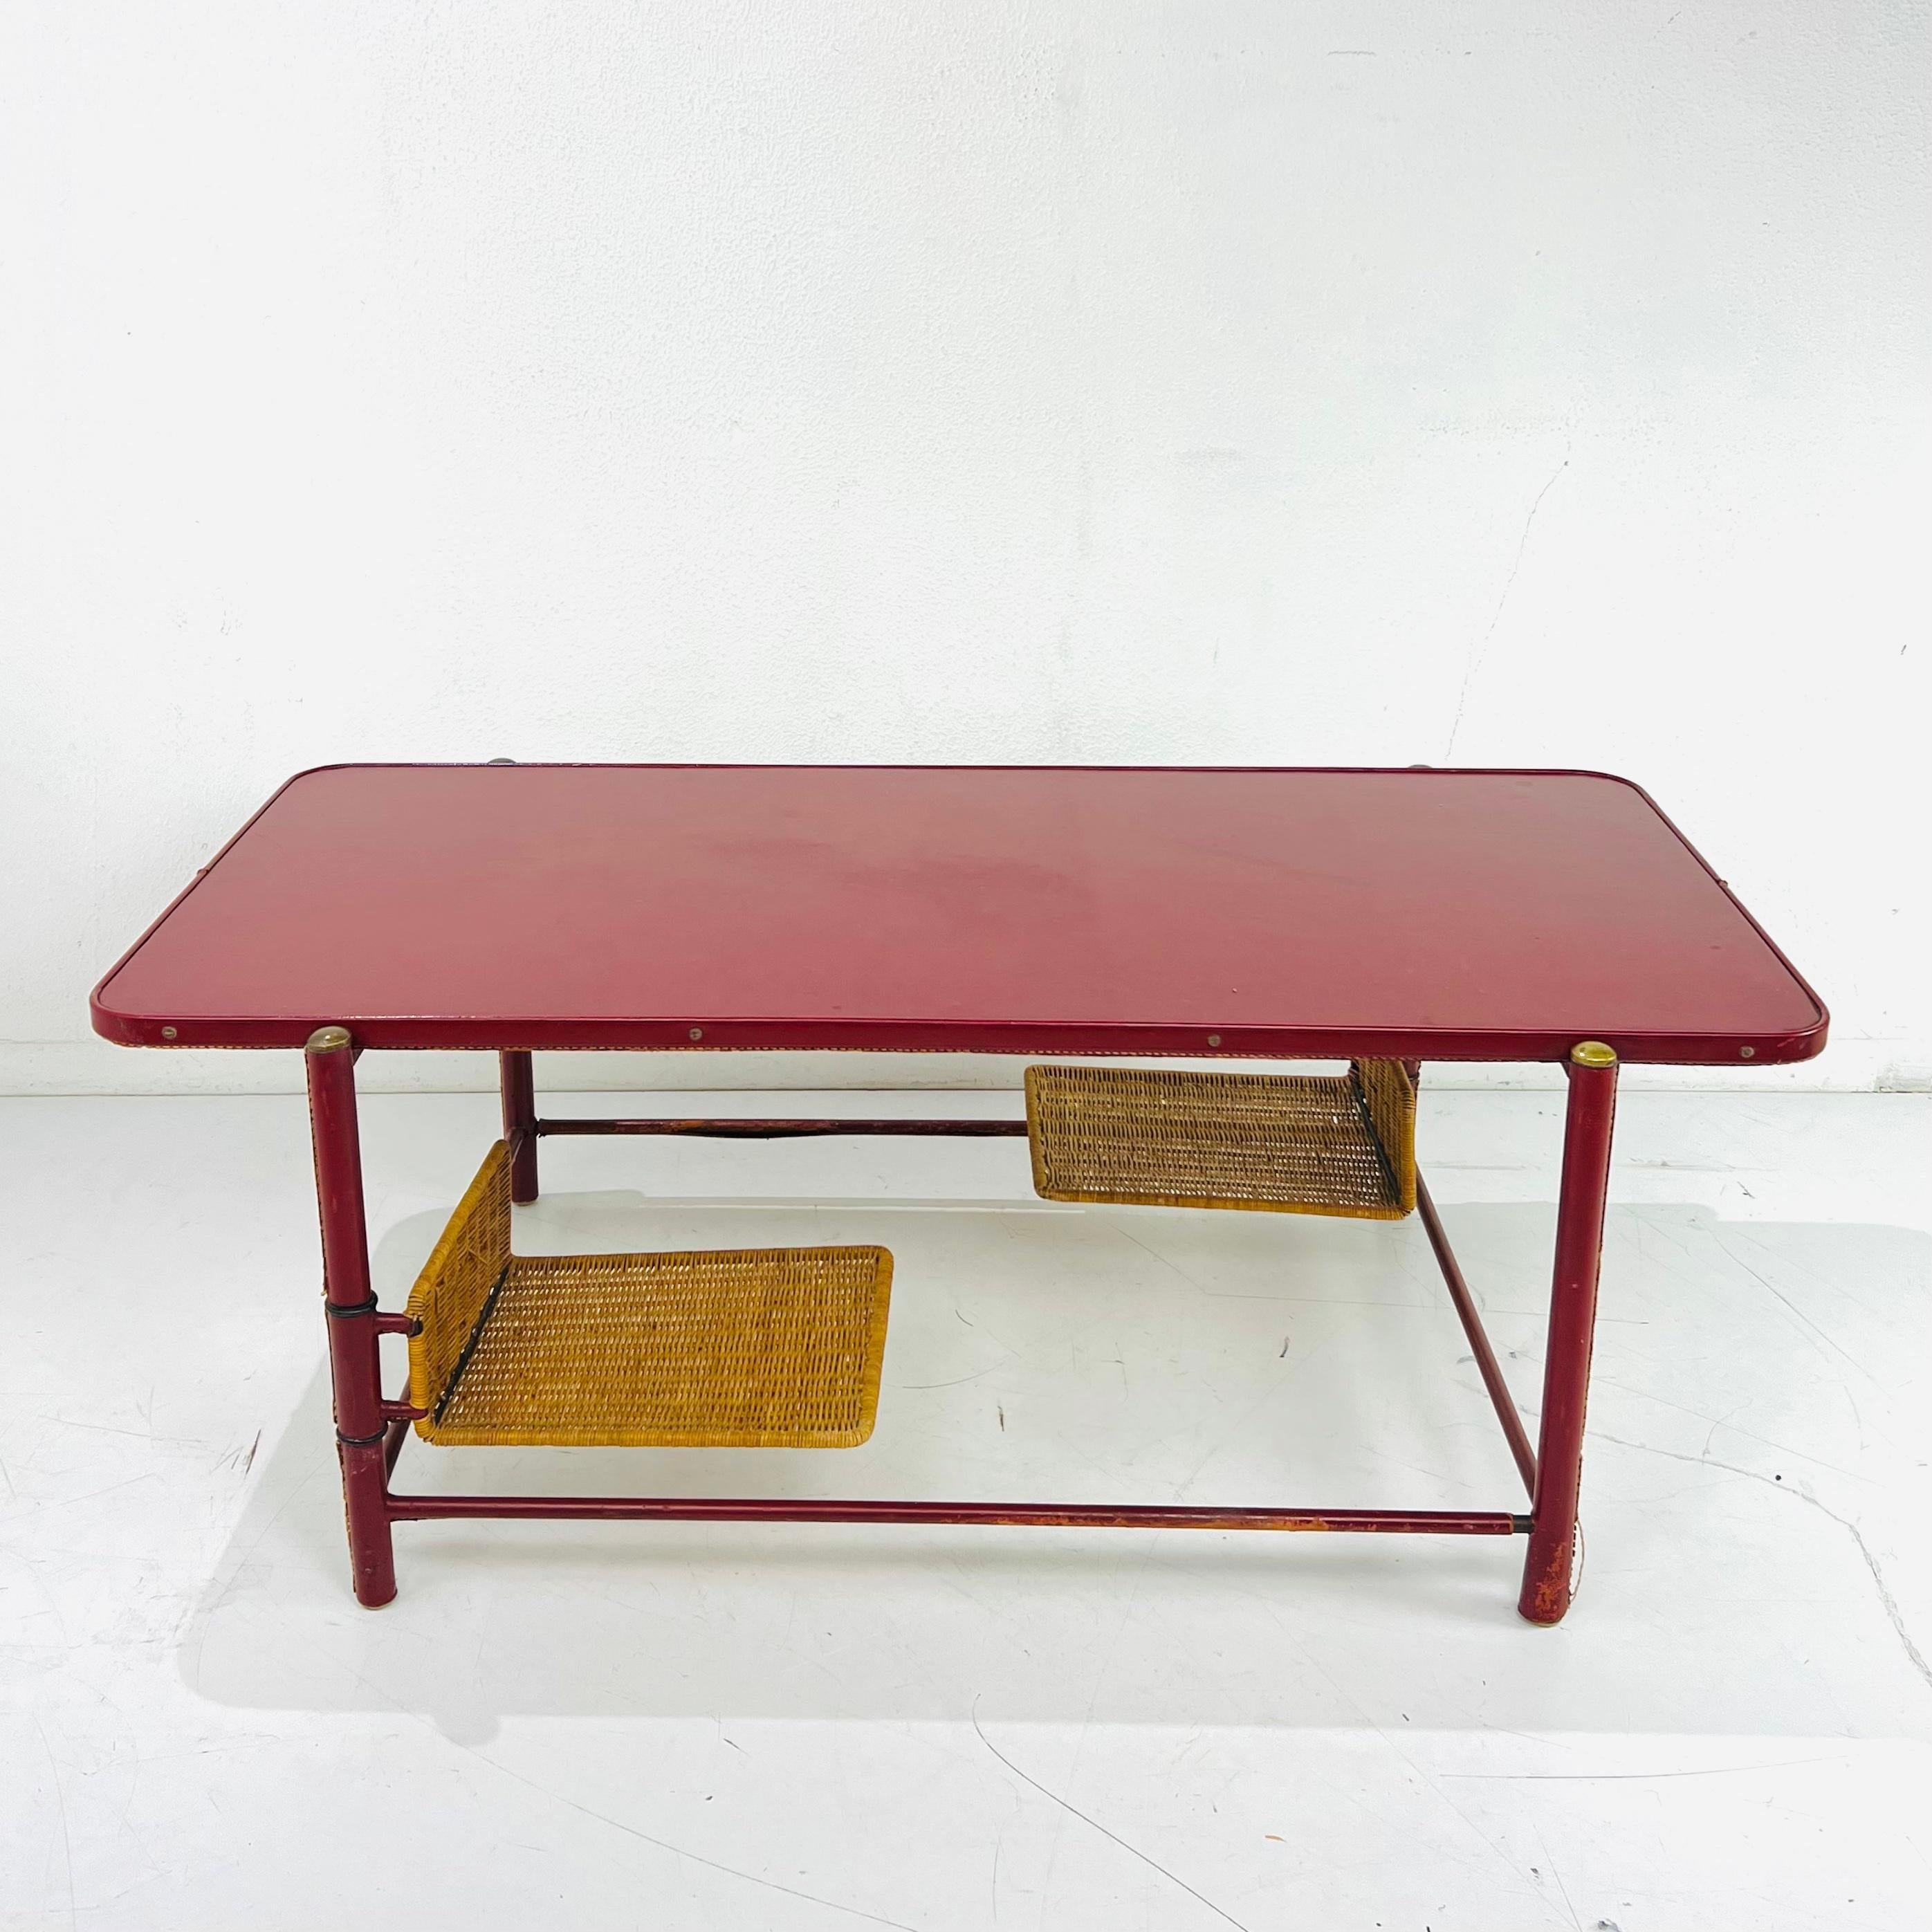 Je suis amoureux! Extraordinary vintage stitched leather coffee table in the style of Jacques Adnet. Wood and iron frame wrapped in hand-stitched red leather. Attached to the faux bamboo legs are two woven swing arm magazine holders and a stretcher